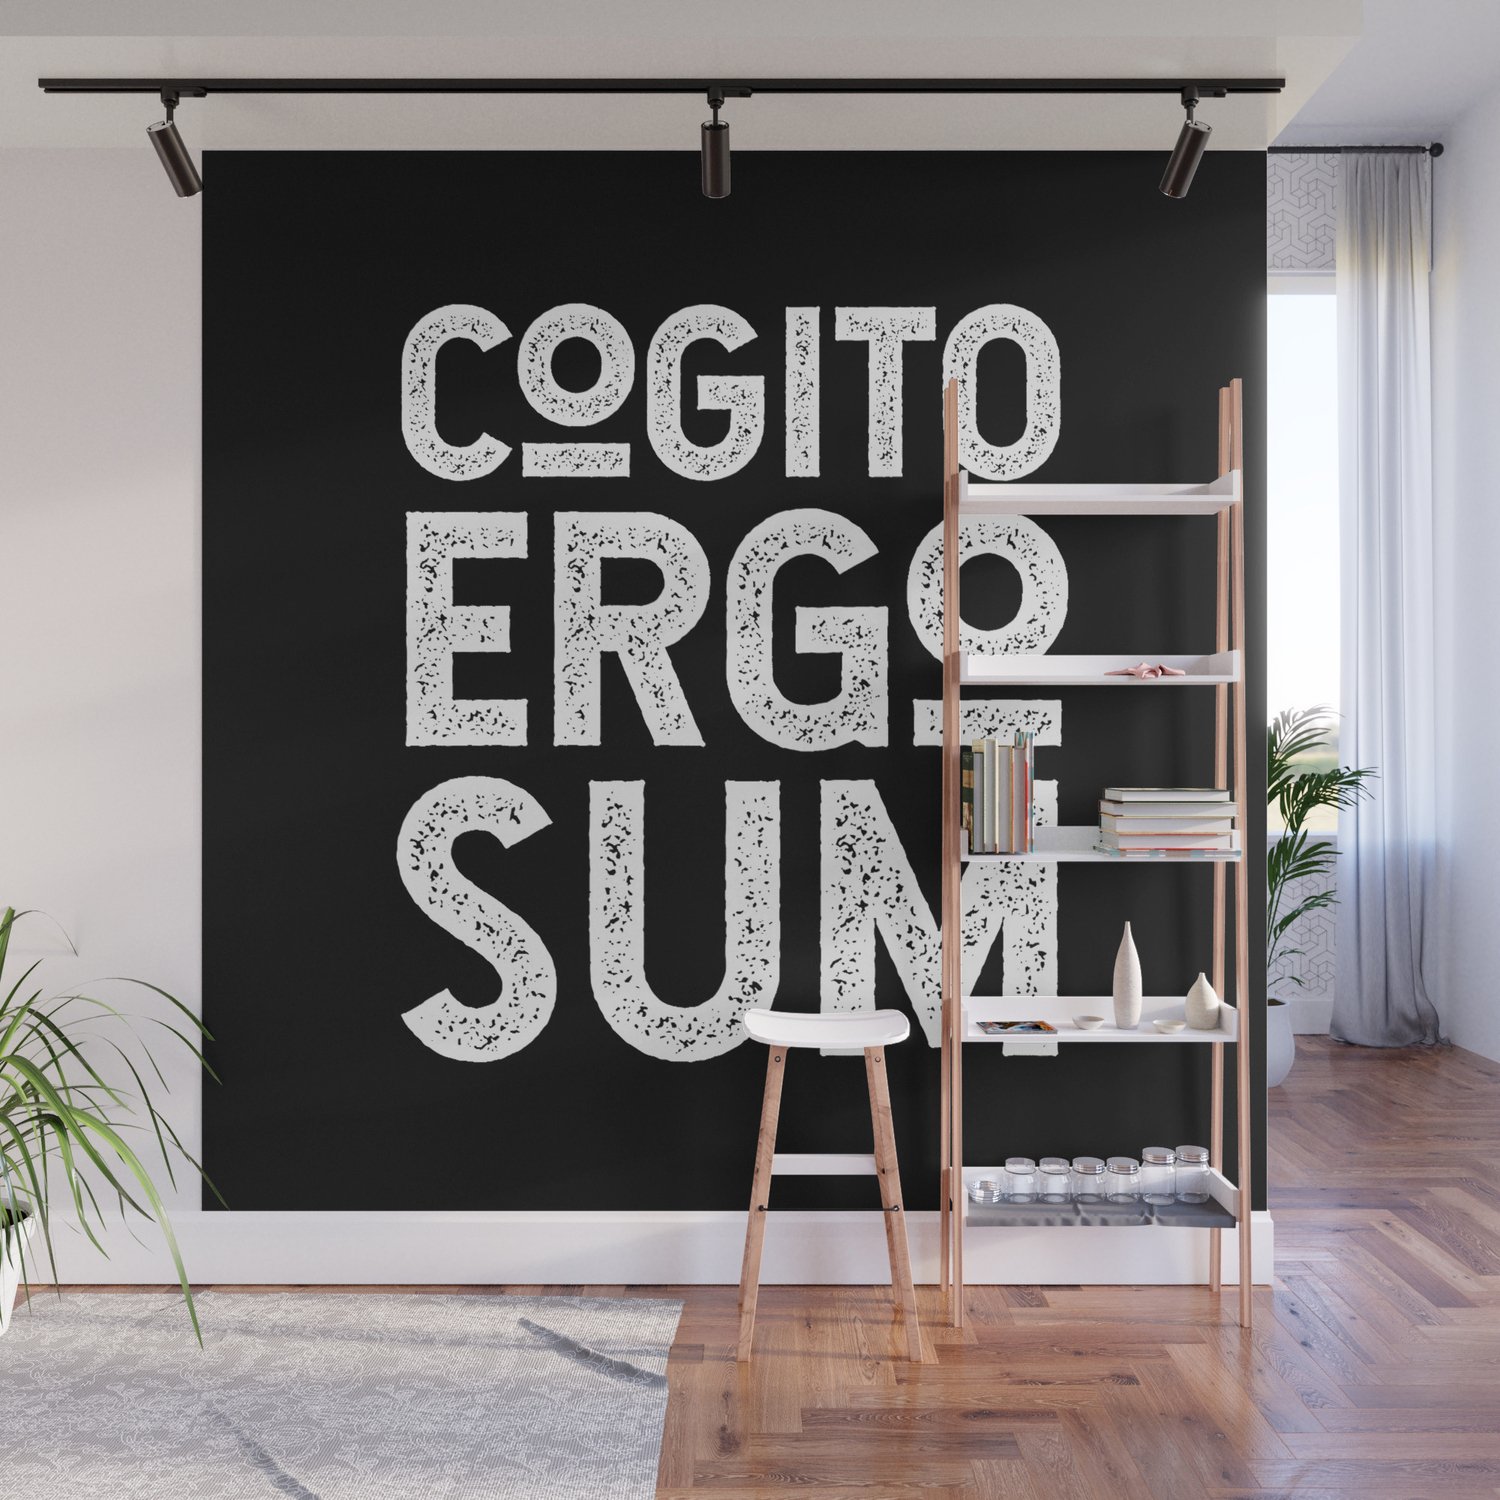 Cogito Ergo Sum Rene Descartes Philosophical Typography I Think Therefore I Am Black And White Wall Mural By Kierkegaard Design Studio Society6